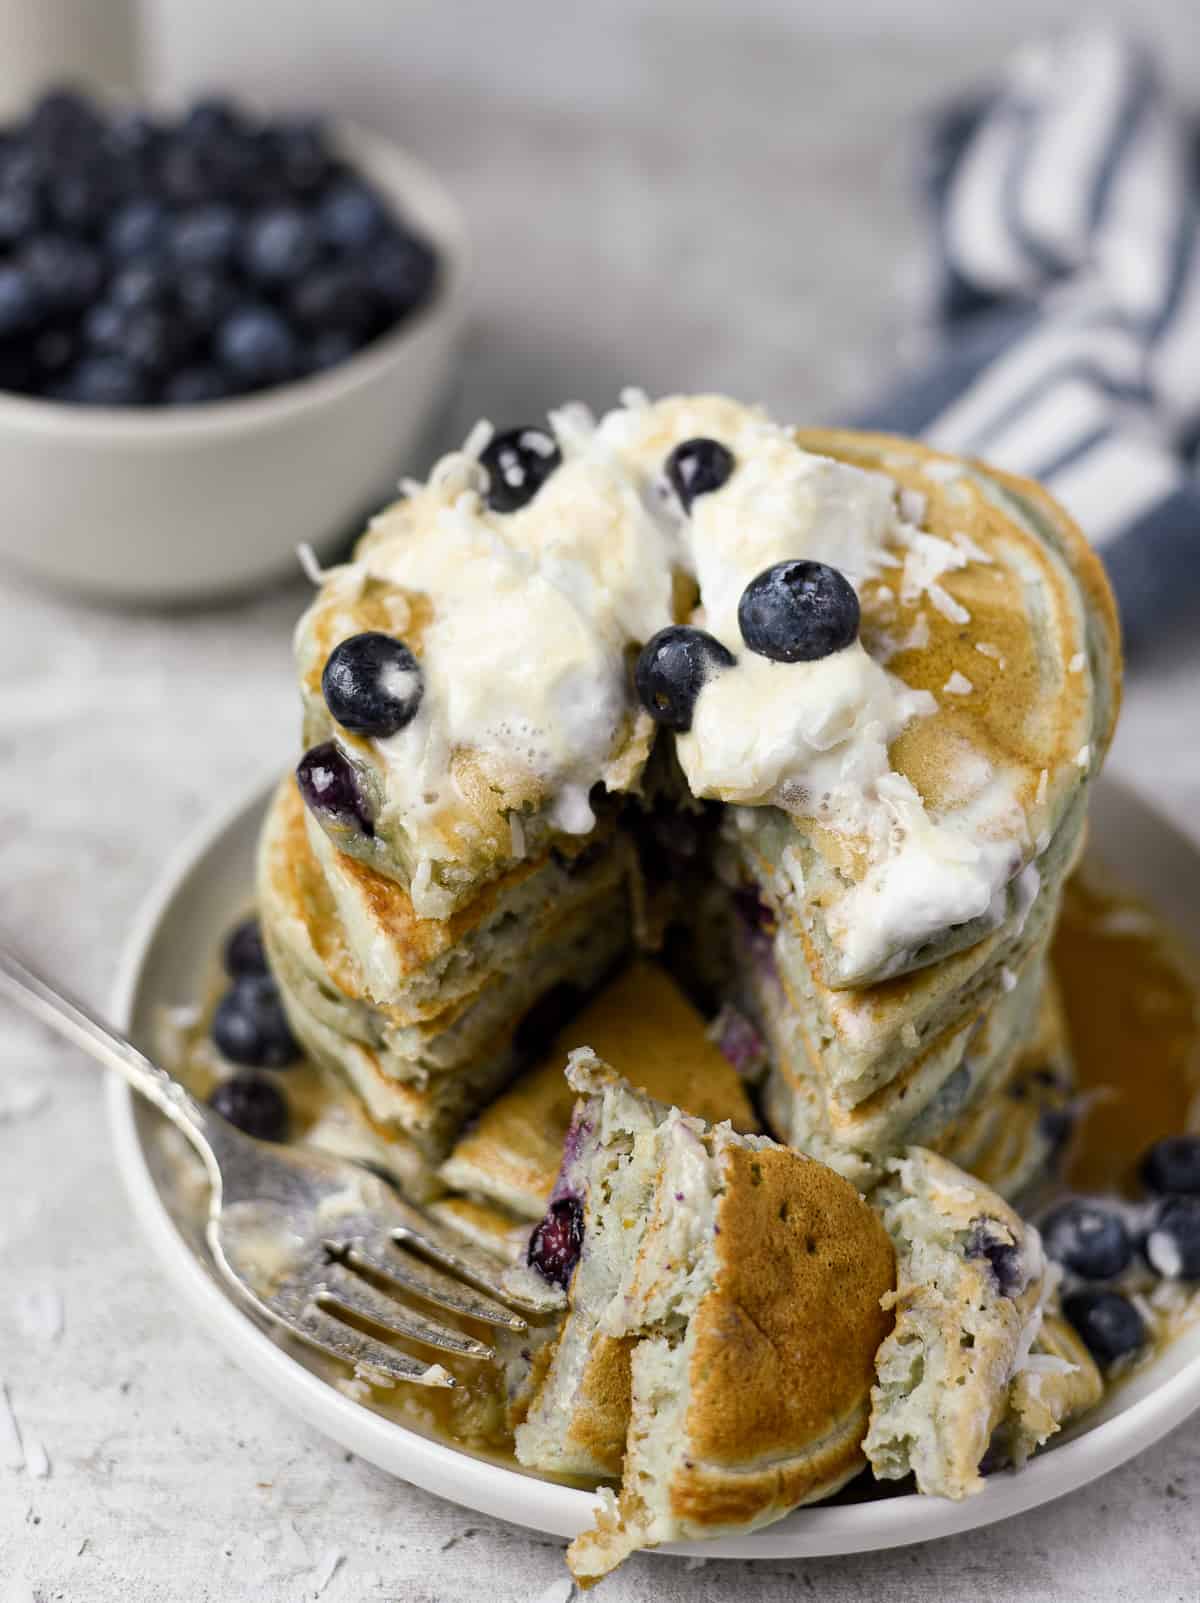 Blueberry pancakes on plate with fork and sliced.